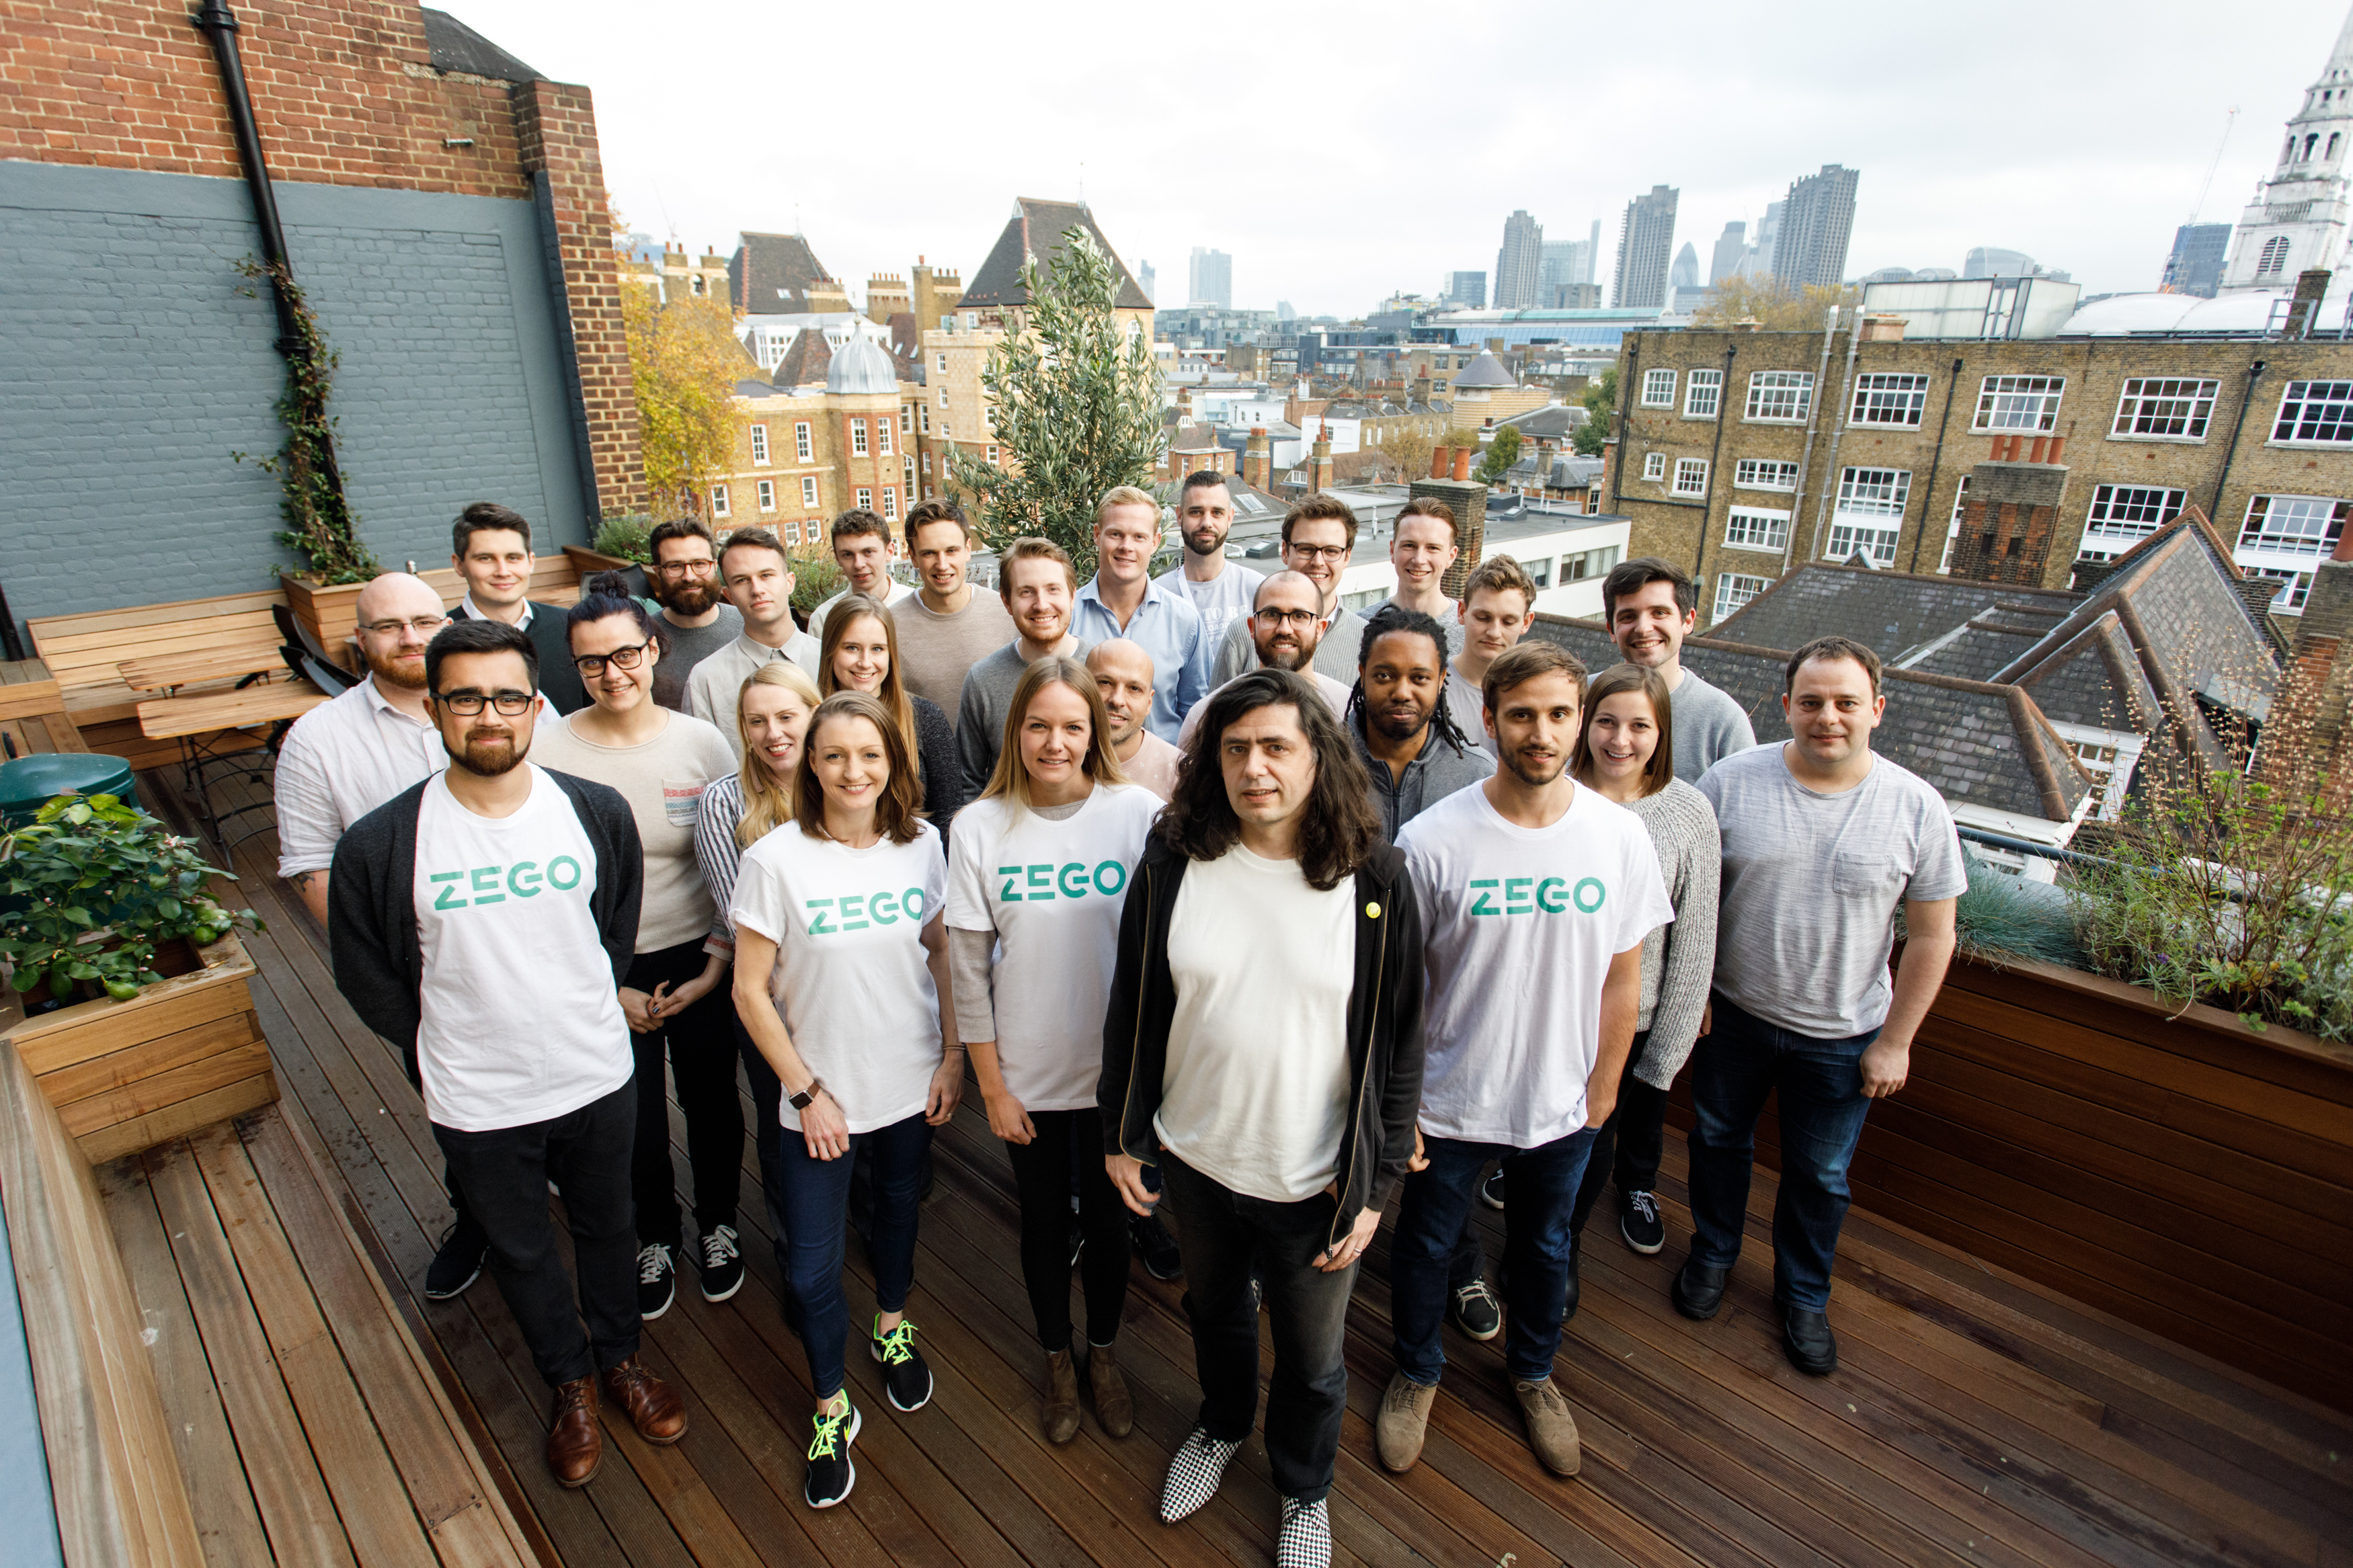 Zego picks up £6M Series A led by Balderton for its gig economy worker insurance